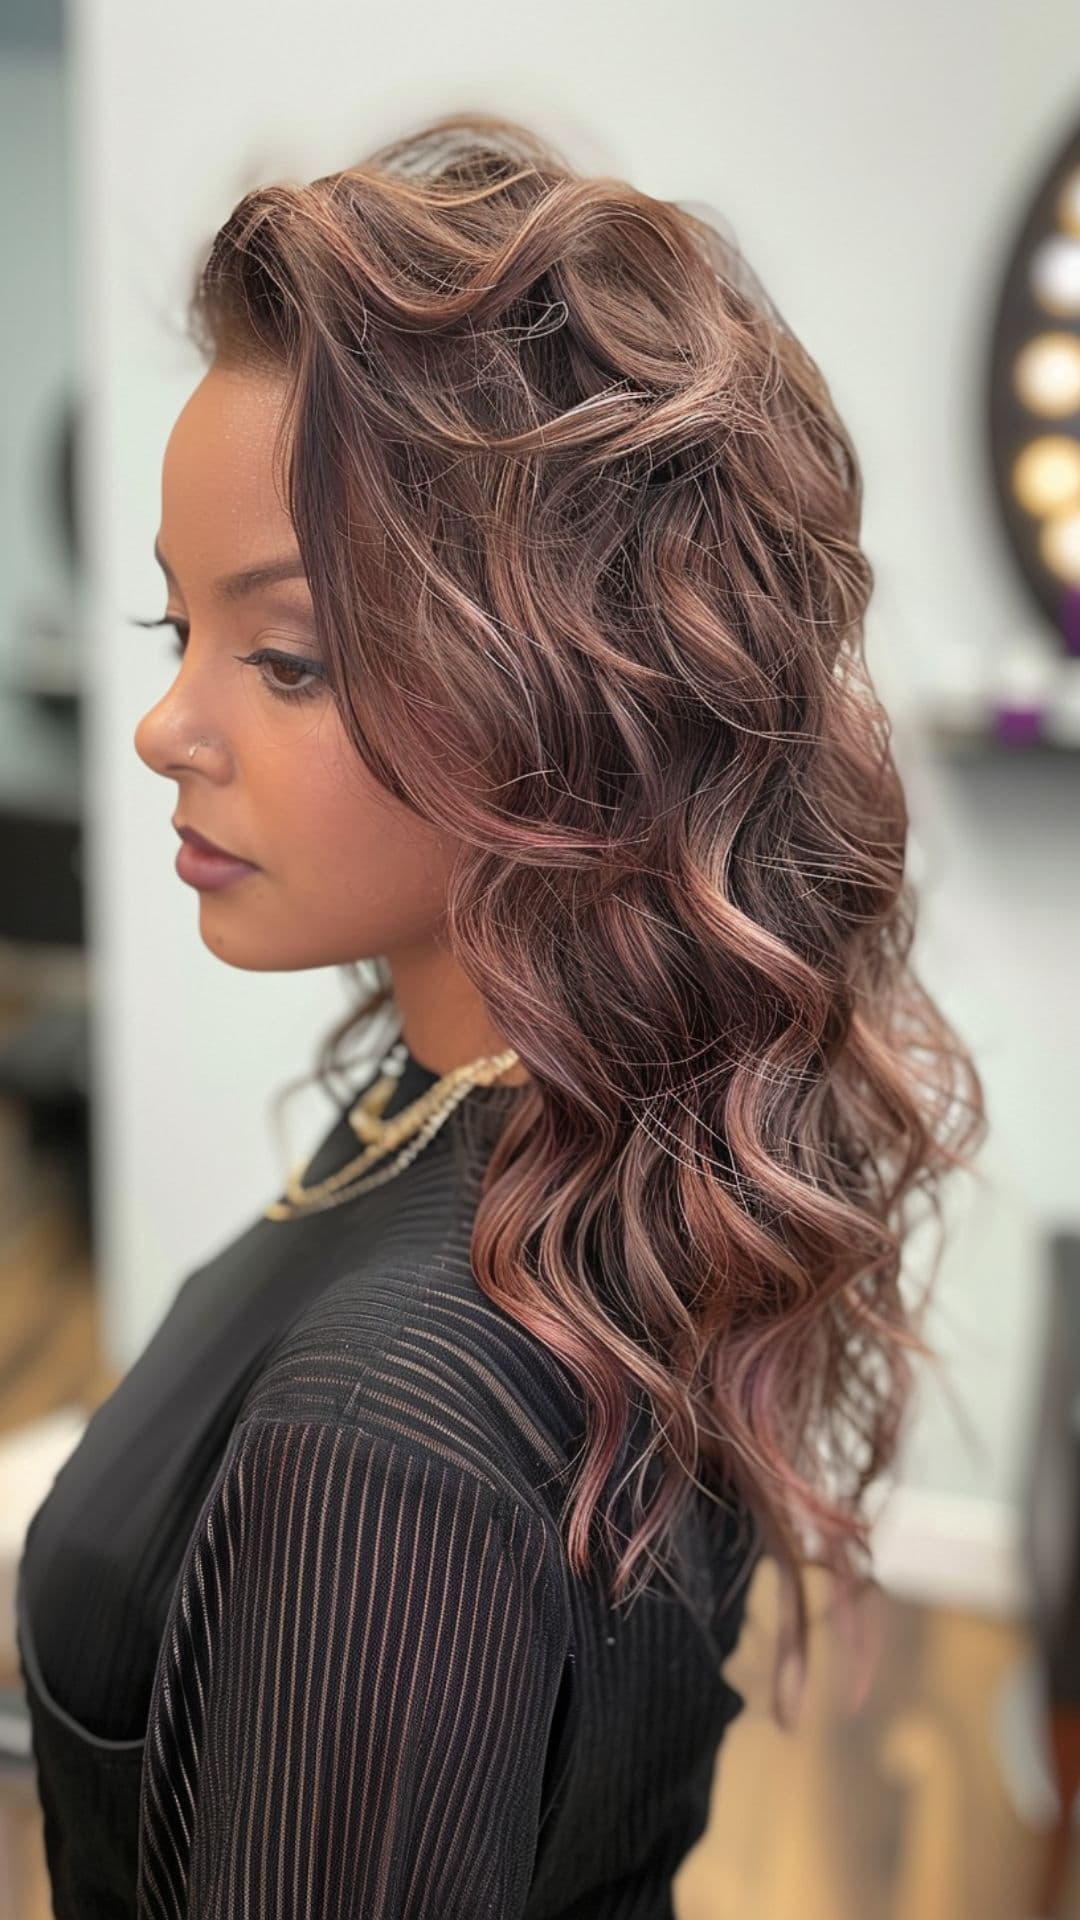 A woman modelling a black hair with rose gold highlights.